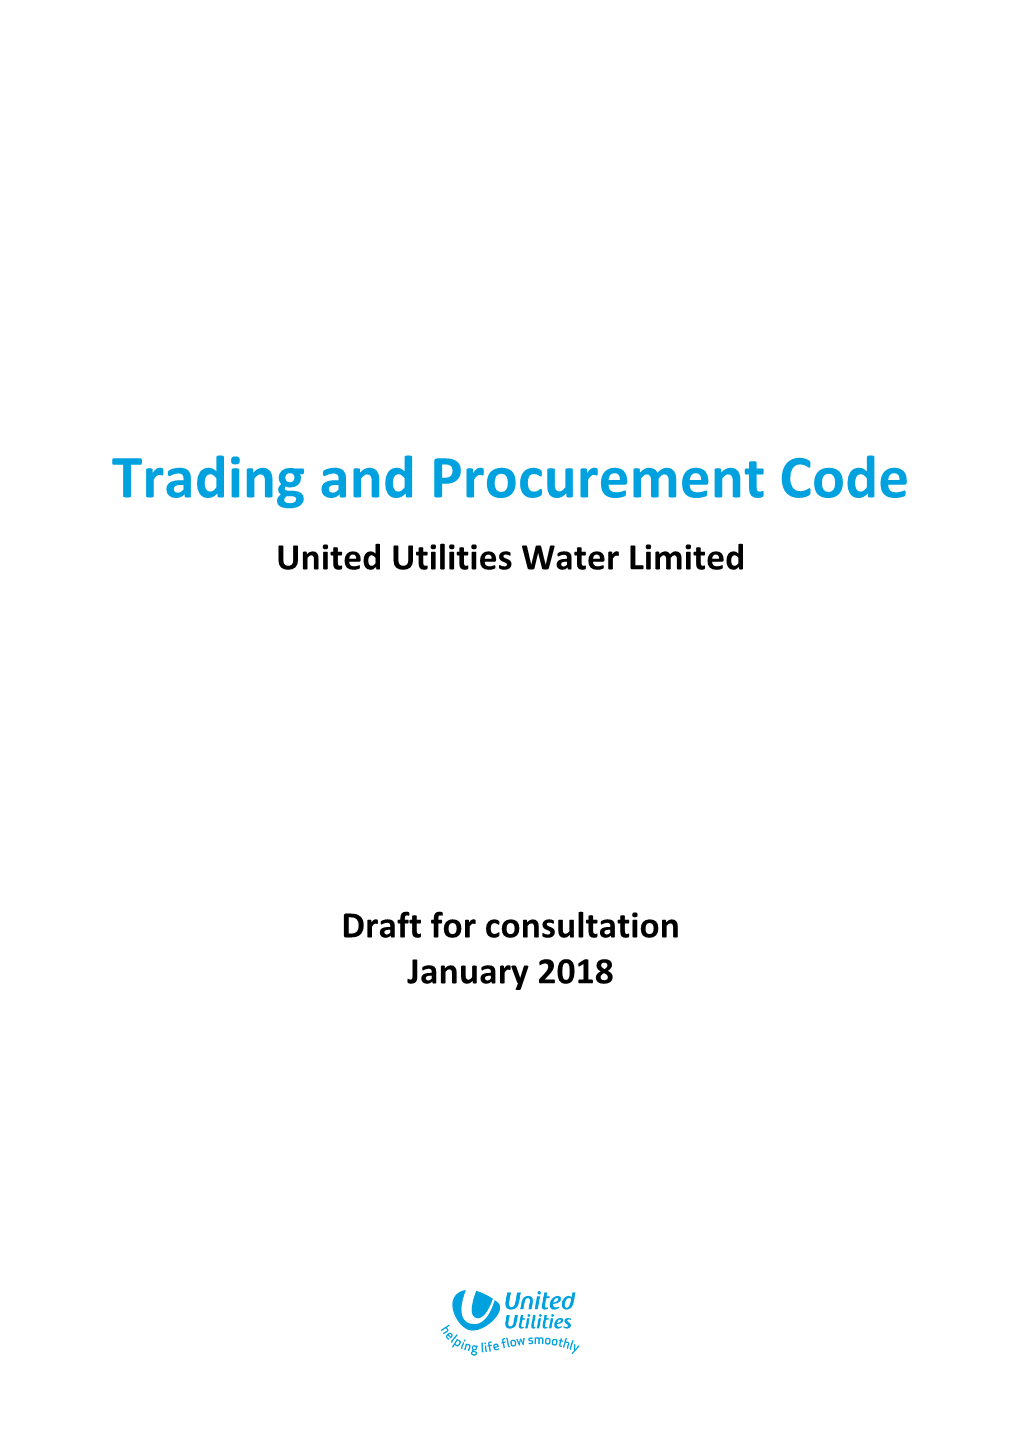 Trading and Procurement Code United Utilities Water Limited